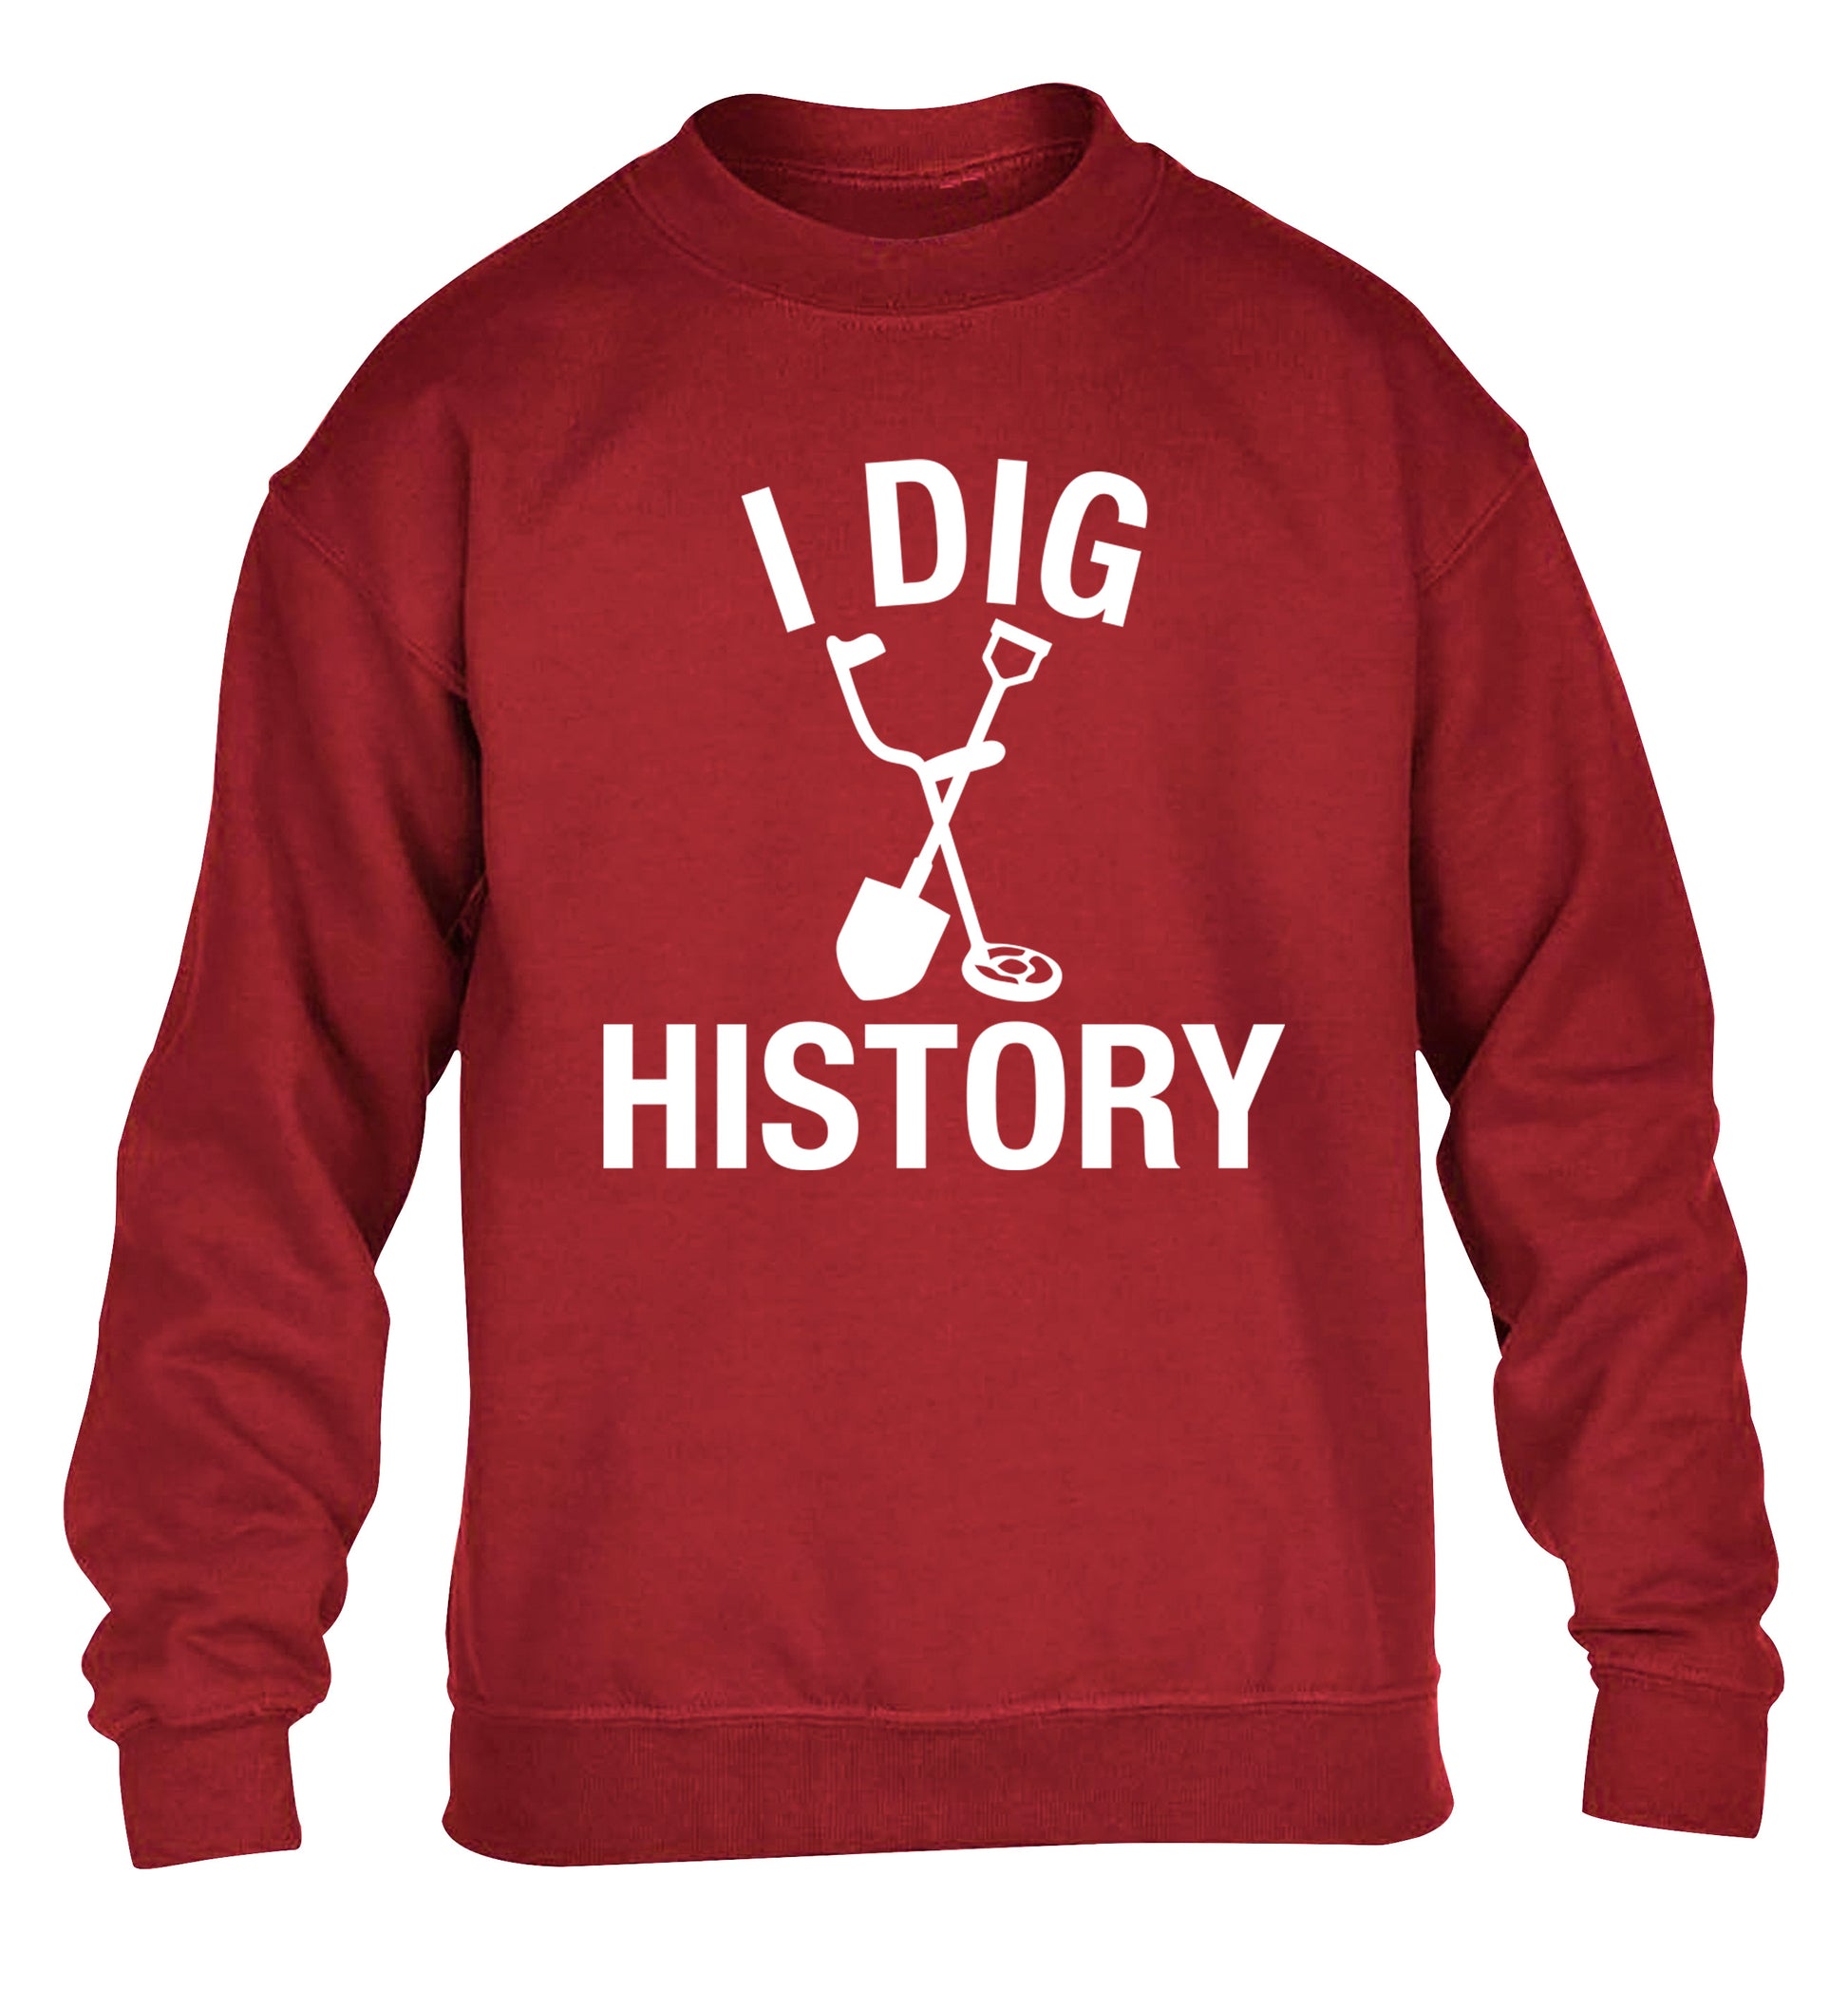 I dig history children's grey sweater 12-13 Years